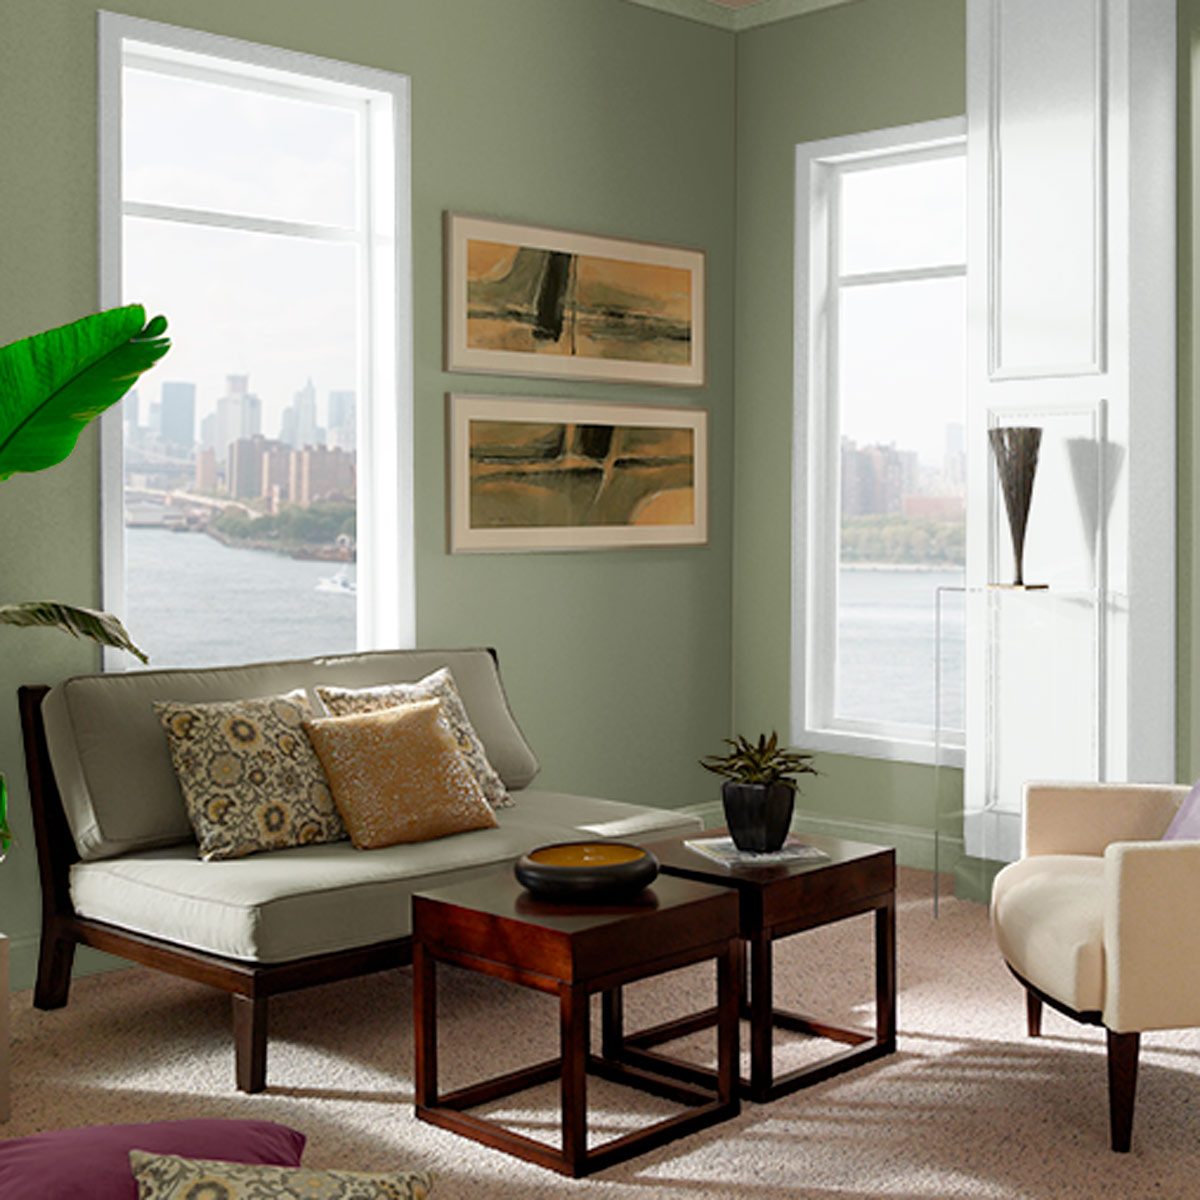 What's Not To Love About Green Wall Paint? | Family Handyman